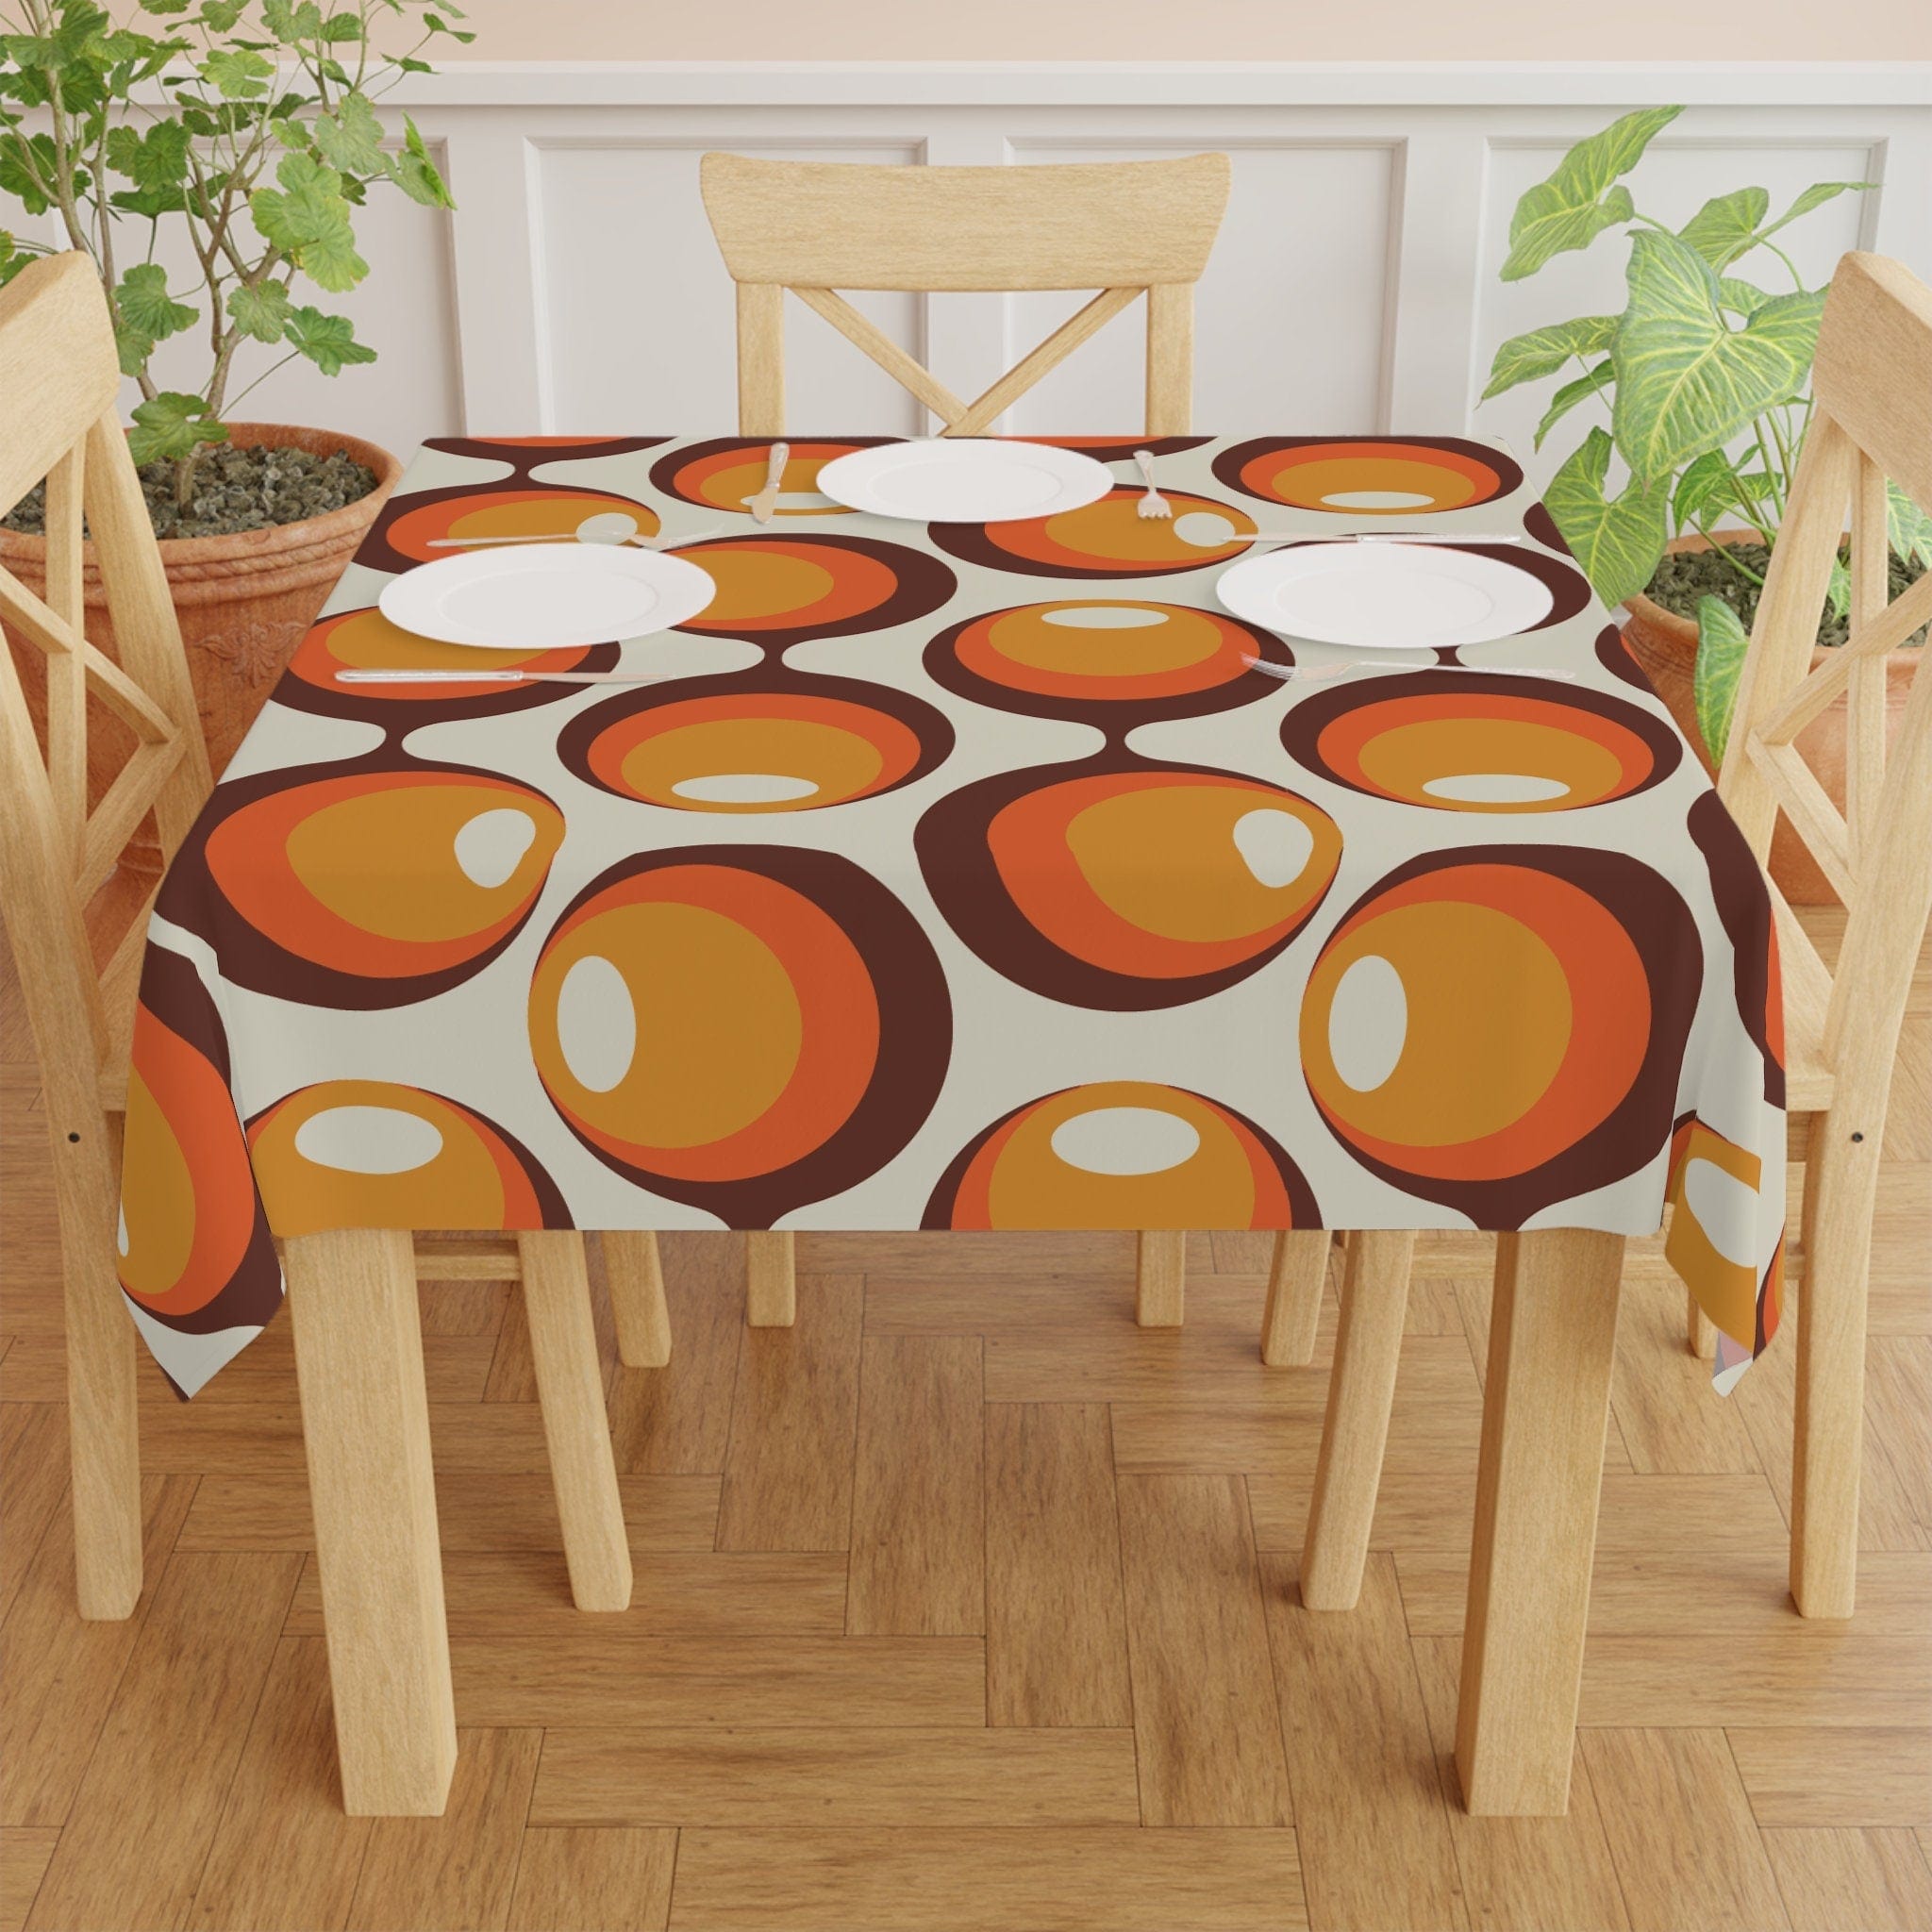 Kate McEnroe New York Retro Groovy Orbs Tablecloth, Atomic Age Vintage Mid Century Modern Orange, Brown, Yellow Table Linens - KM13569723Tablecloths13555613521045870735